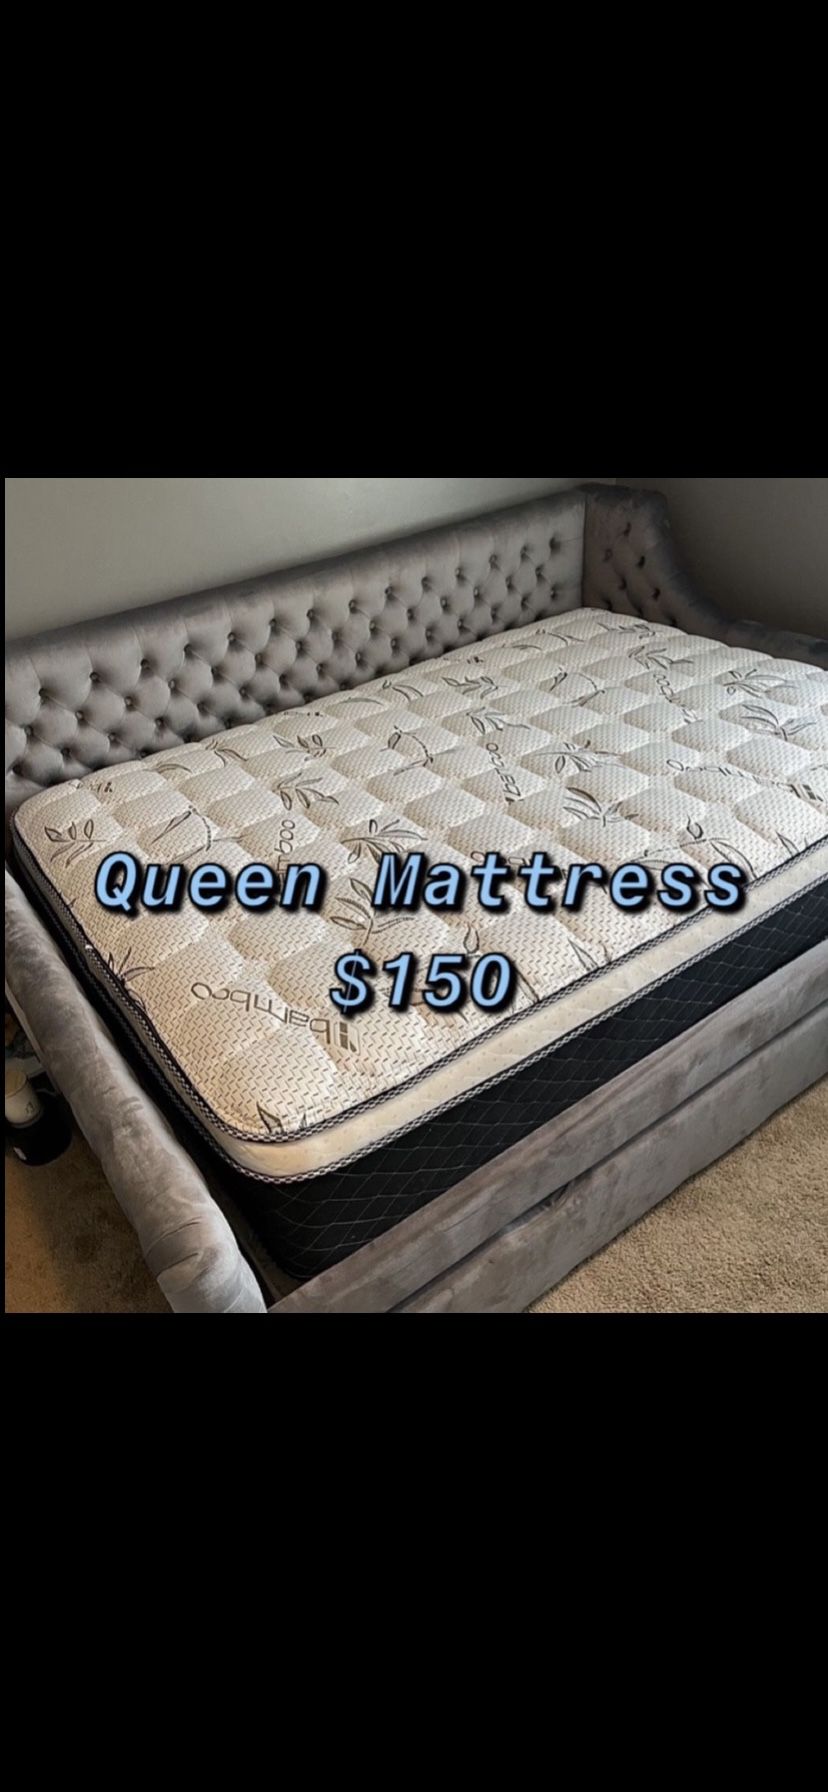 new orthopedic Pillow top mattresses Colchones nuevos ortopédicos pillow top   Queen size  $150 - $210 With Box Spring   Full size  $140 - $200 With B